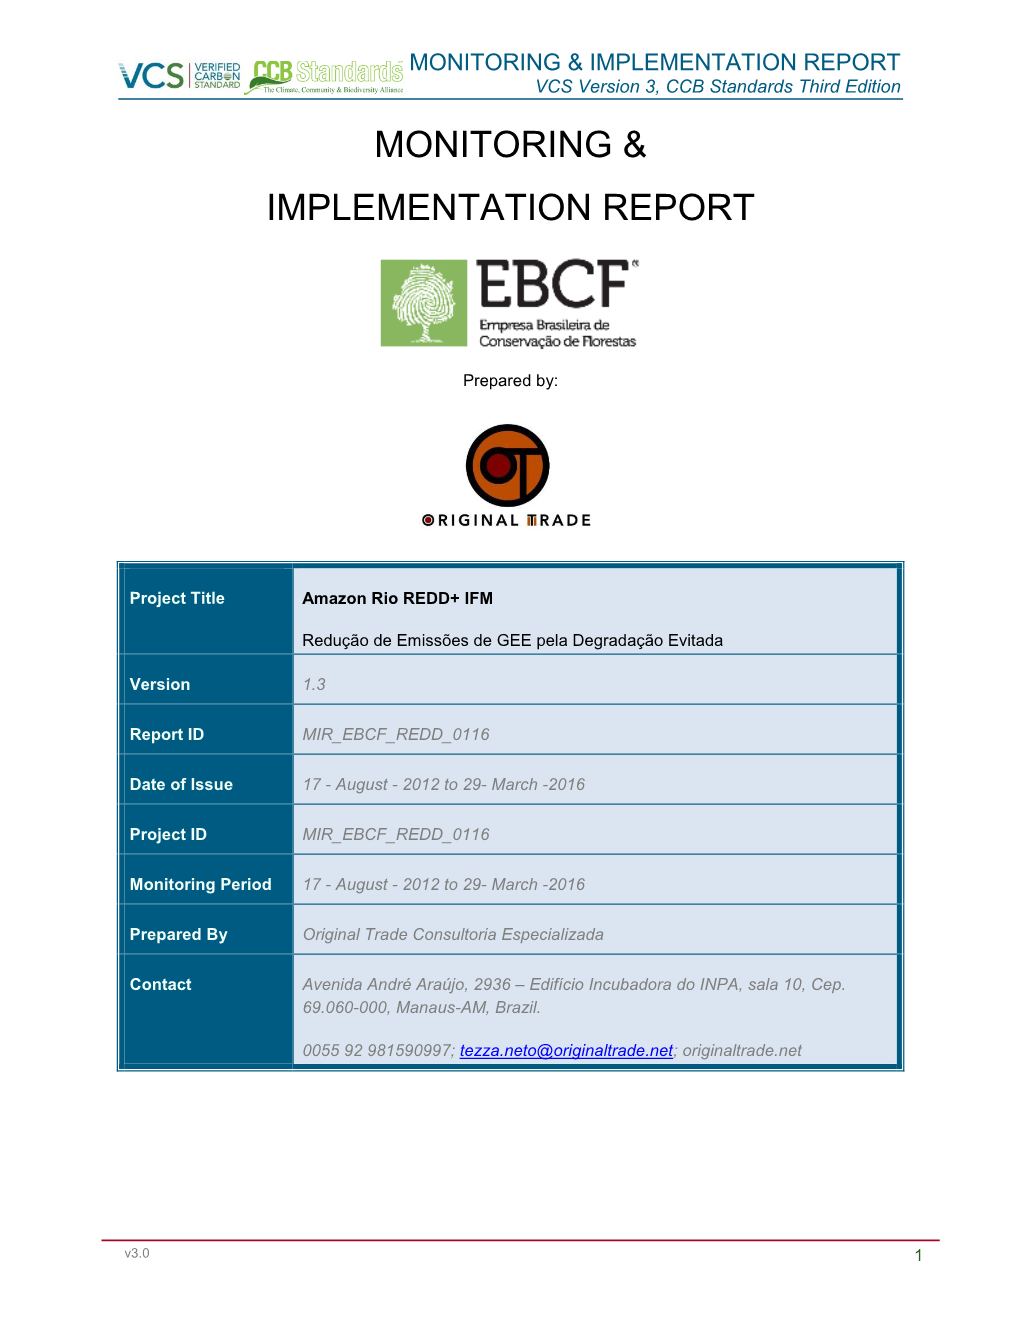 Monitoring & Implementation Report